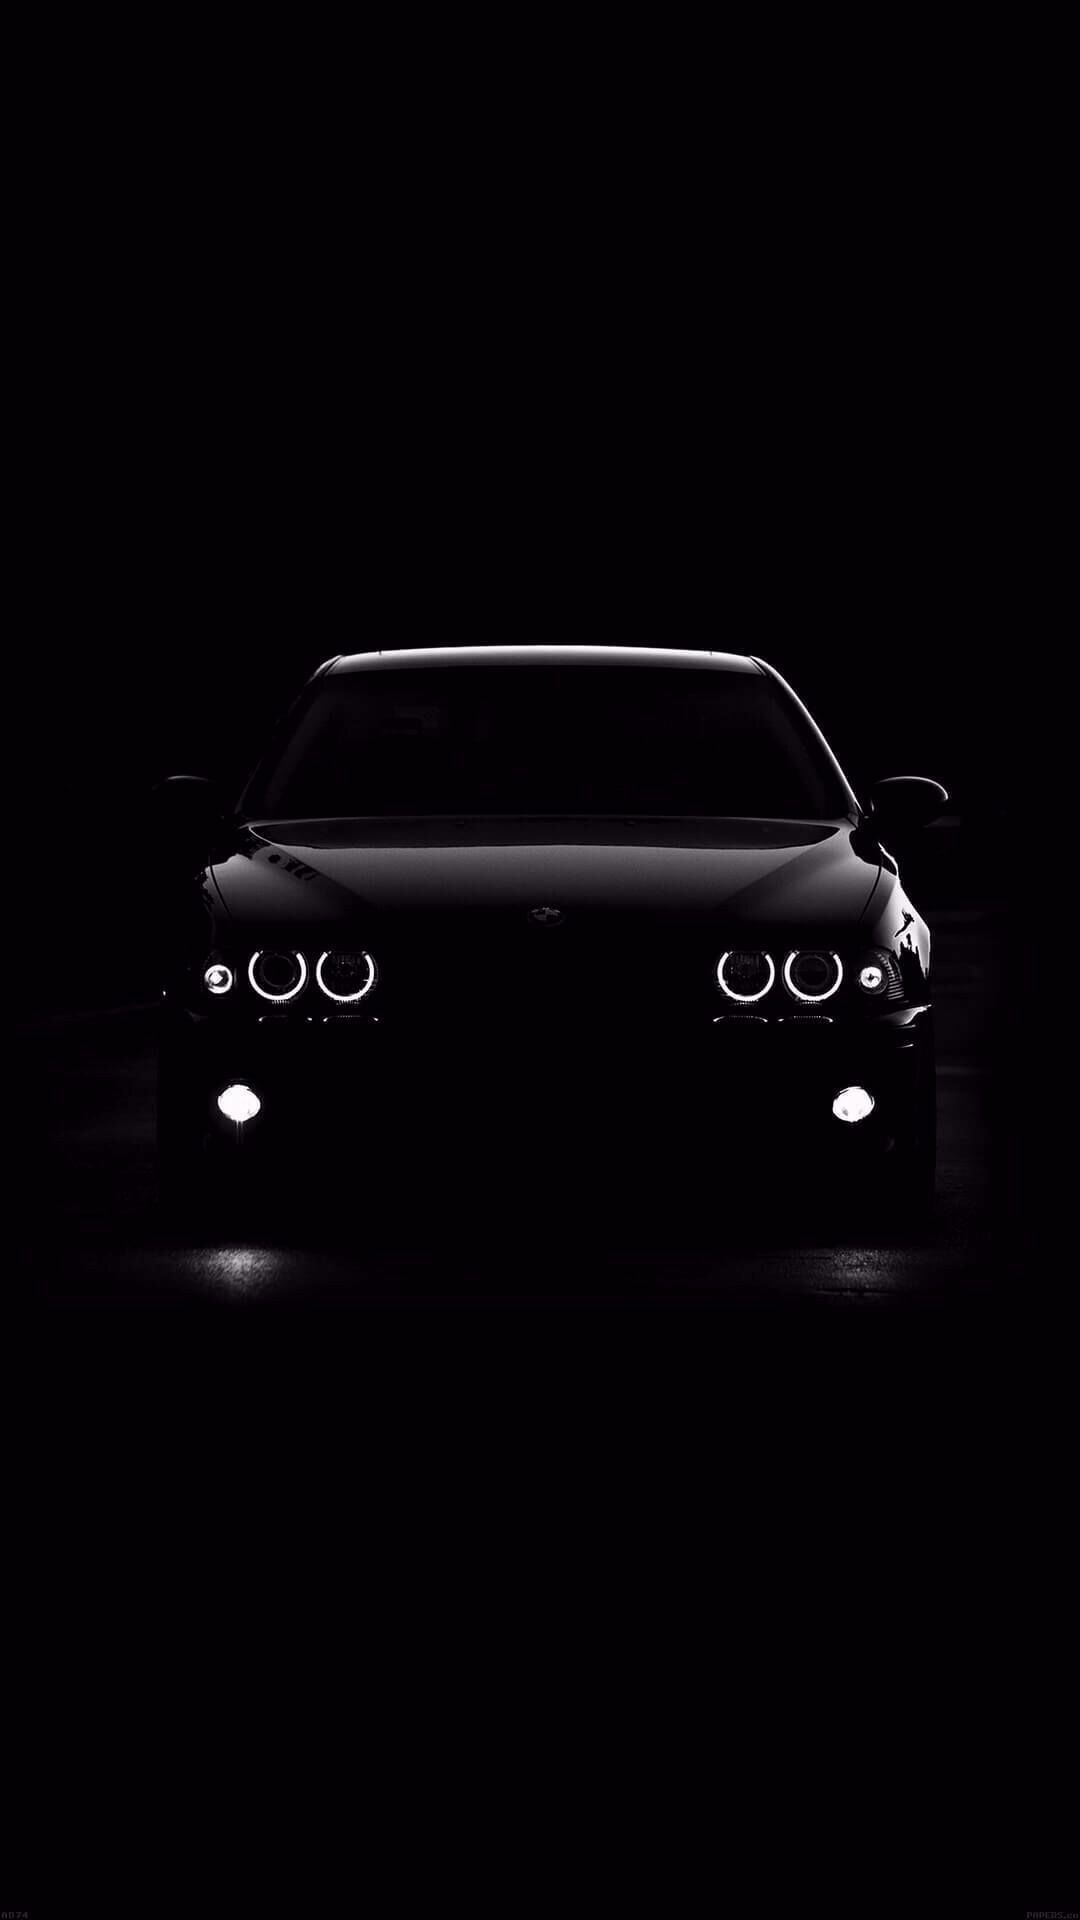 BMW: A German company that produces cars, Angel Eyes, Known as "halos". 1080x1920 Full HD Wallpaper.